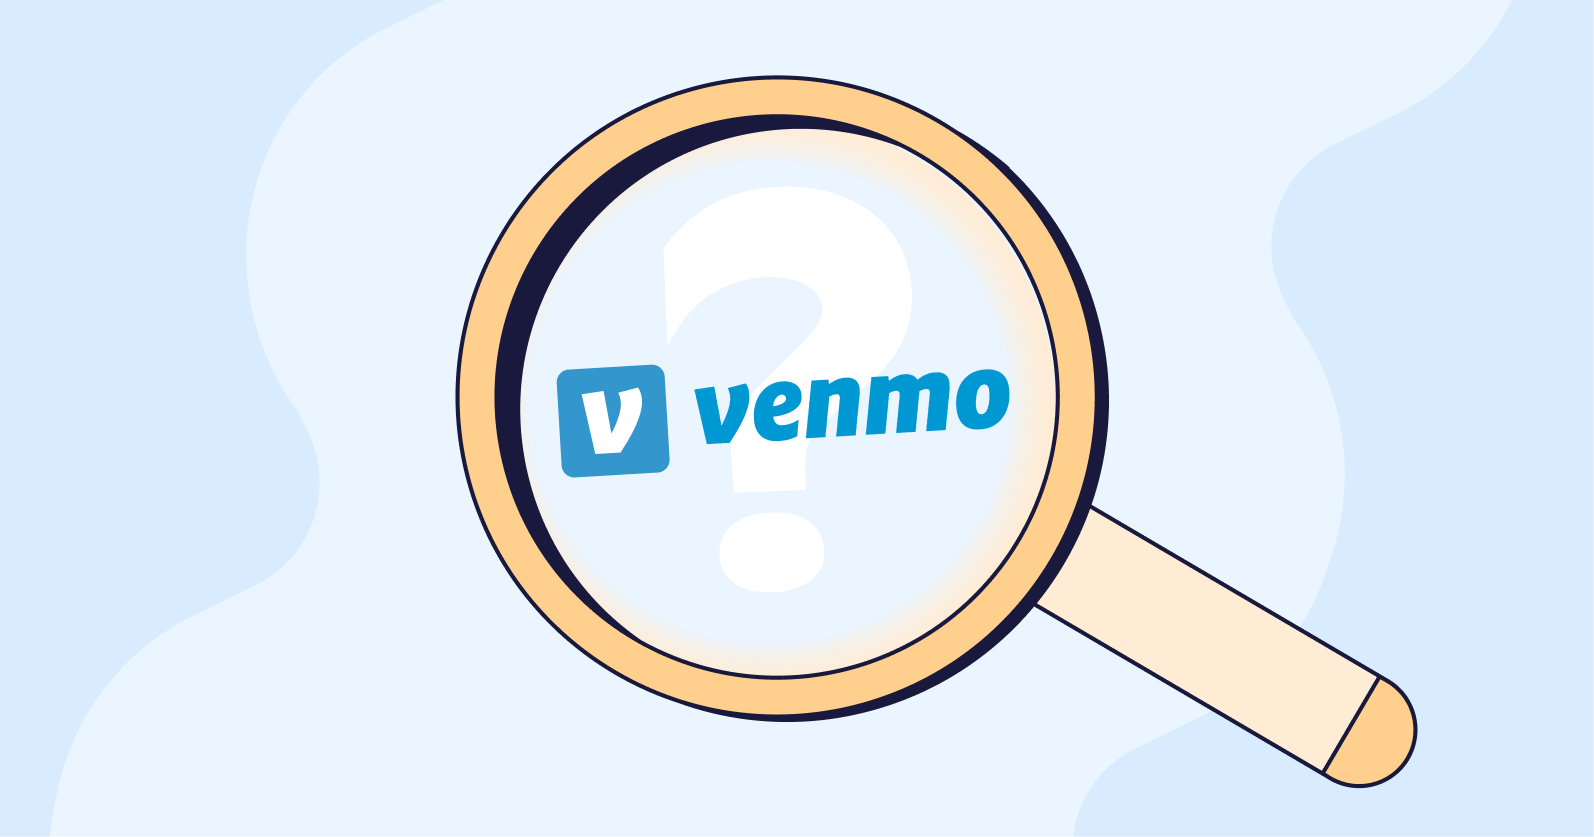 Illustration of a magnify glass with the Venmo logo and a question mark in the middle.